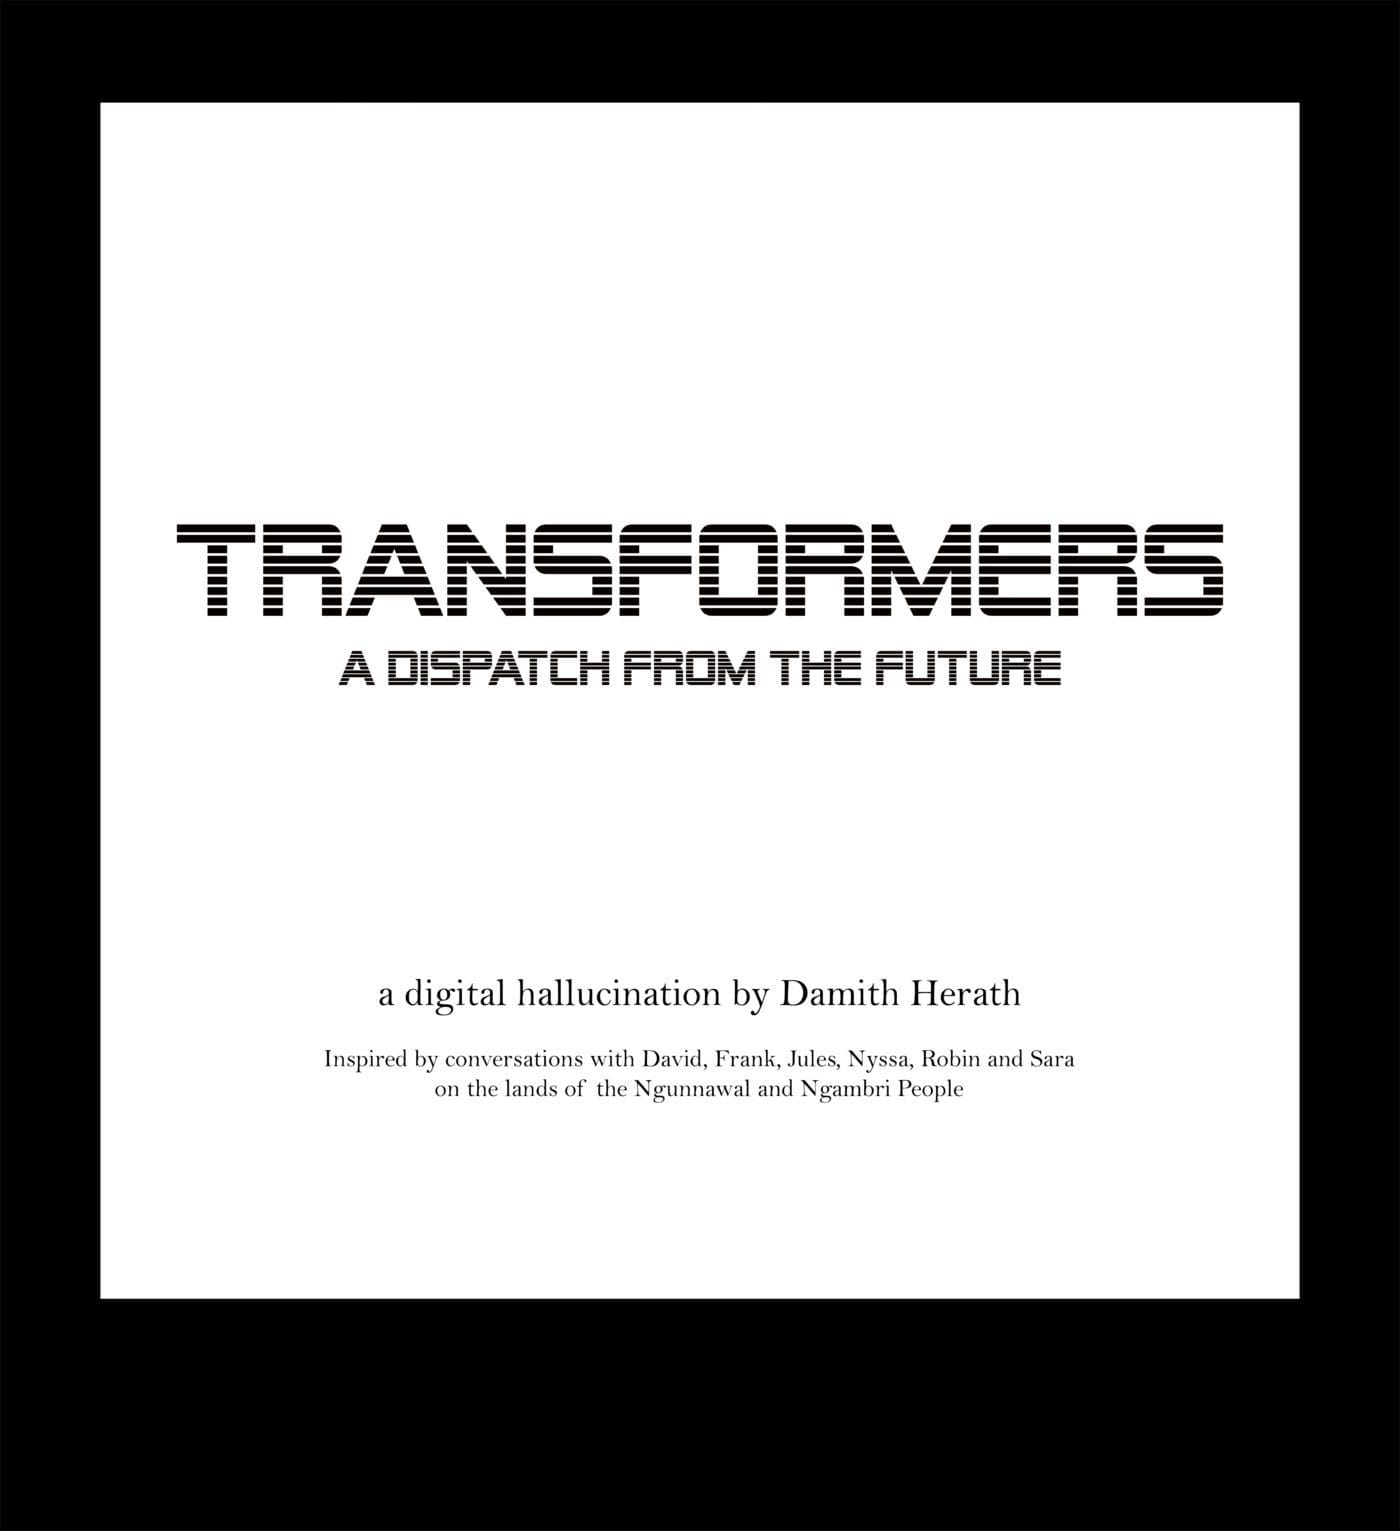 TRANSFORMERS: A Dispatch from the Future. A digital hallucination by Damith Herath. Inspired by conversations with David, Frank, Jules, Nyssa, Robin and Sara, on the lands of the Ngunnawal and Ngambri people.